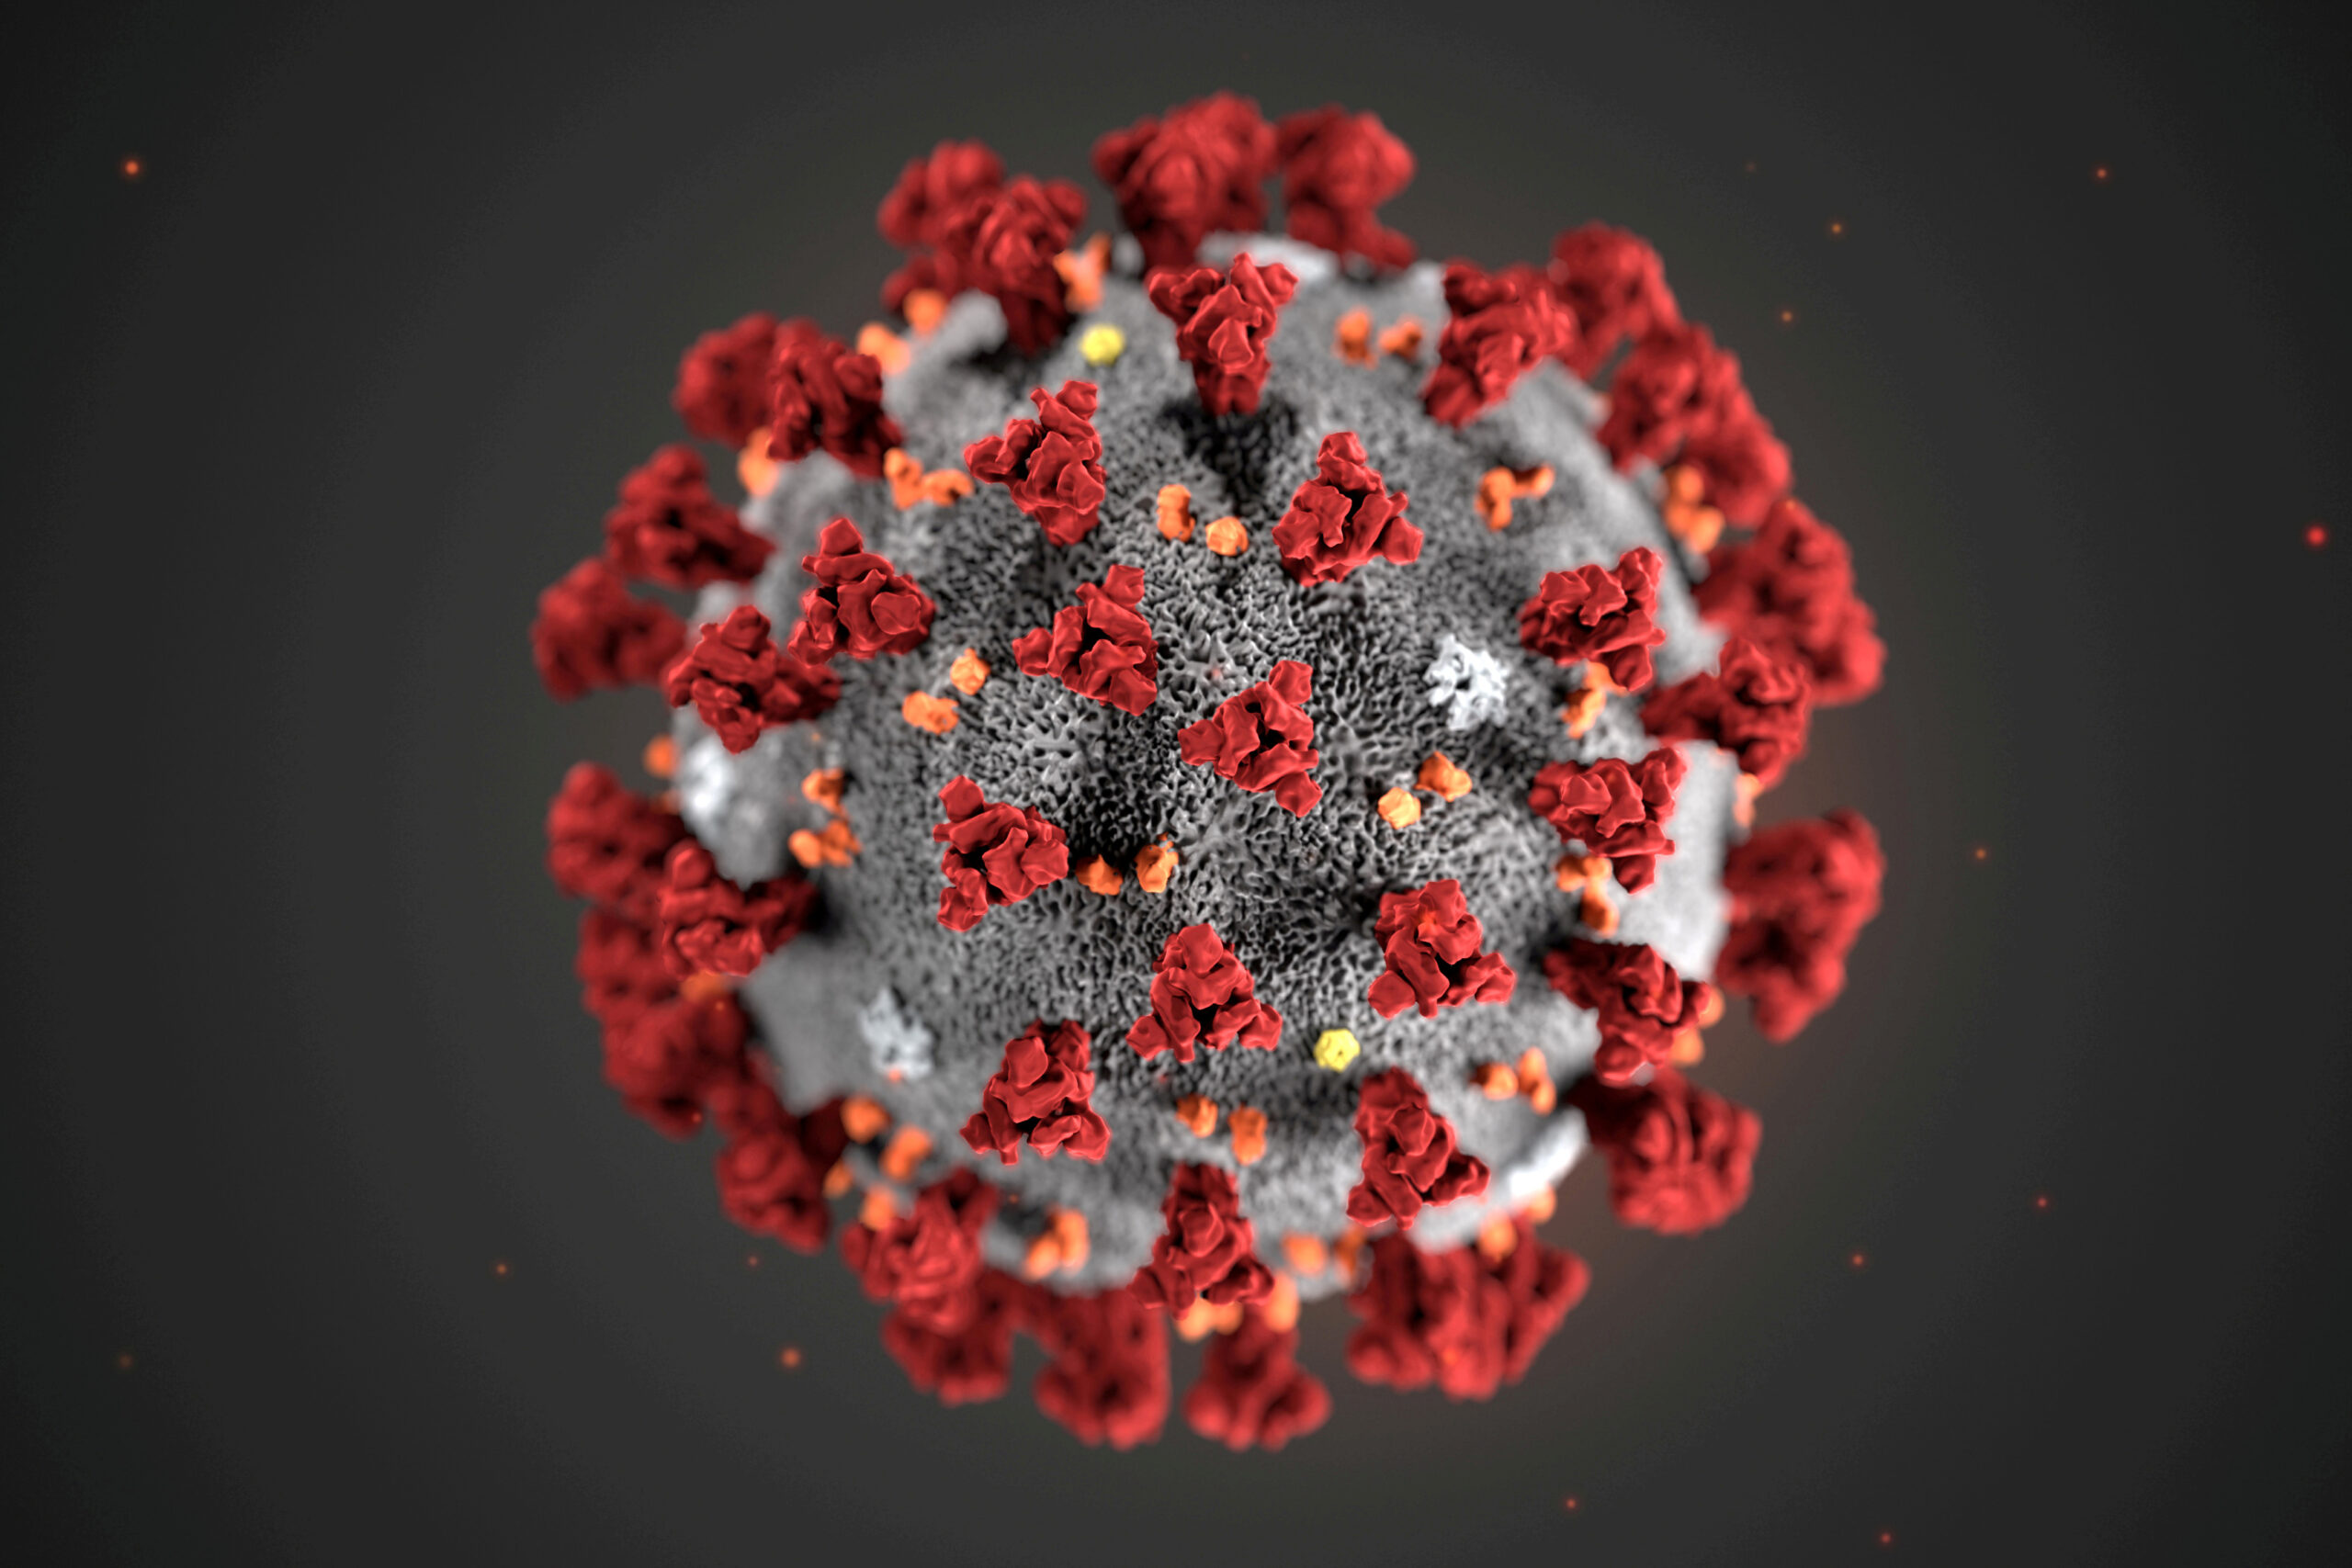 FILE PHOTO: The ultrastructural morphology exhibited by the 2019 Novel Coronavirus (2019-nCoV), which was identified as the cause of an outbreak of respiratory illness first detected in Wuhan, China, is seen in an illustration released by the Centers for Disease Control and Prevention (CDC) in Atlanta, Georgia, U.S. January 29, 2020. Alissa Eckert, MS; Dan Higgins, MAM/CDC/Handout via REUTERS.